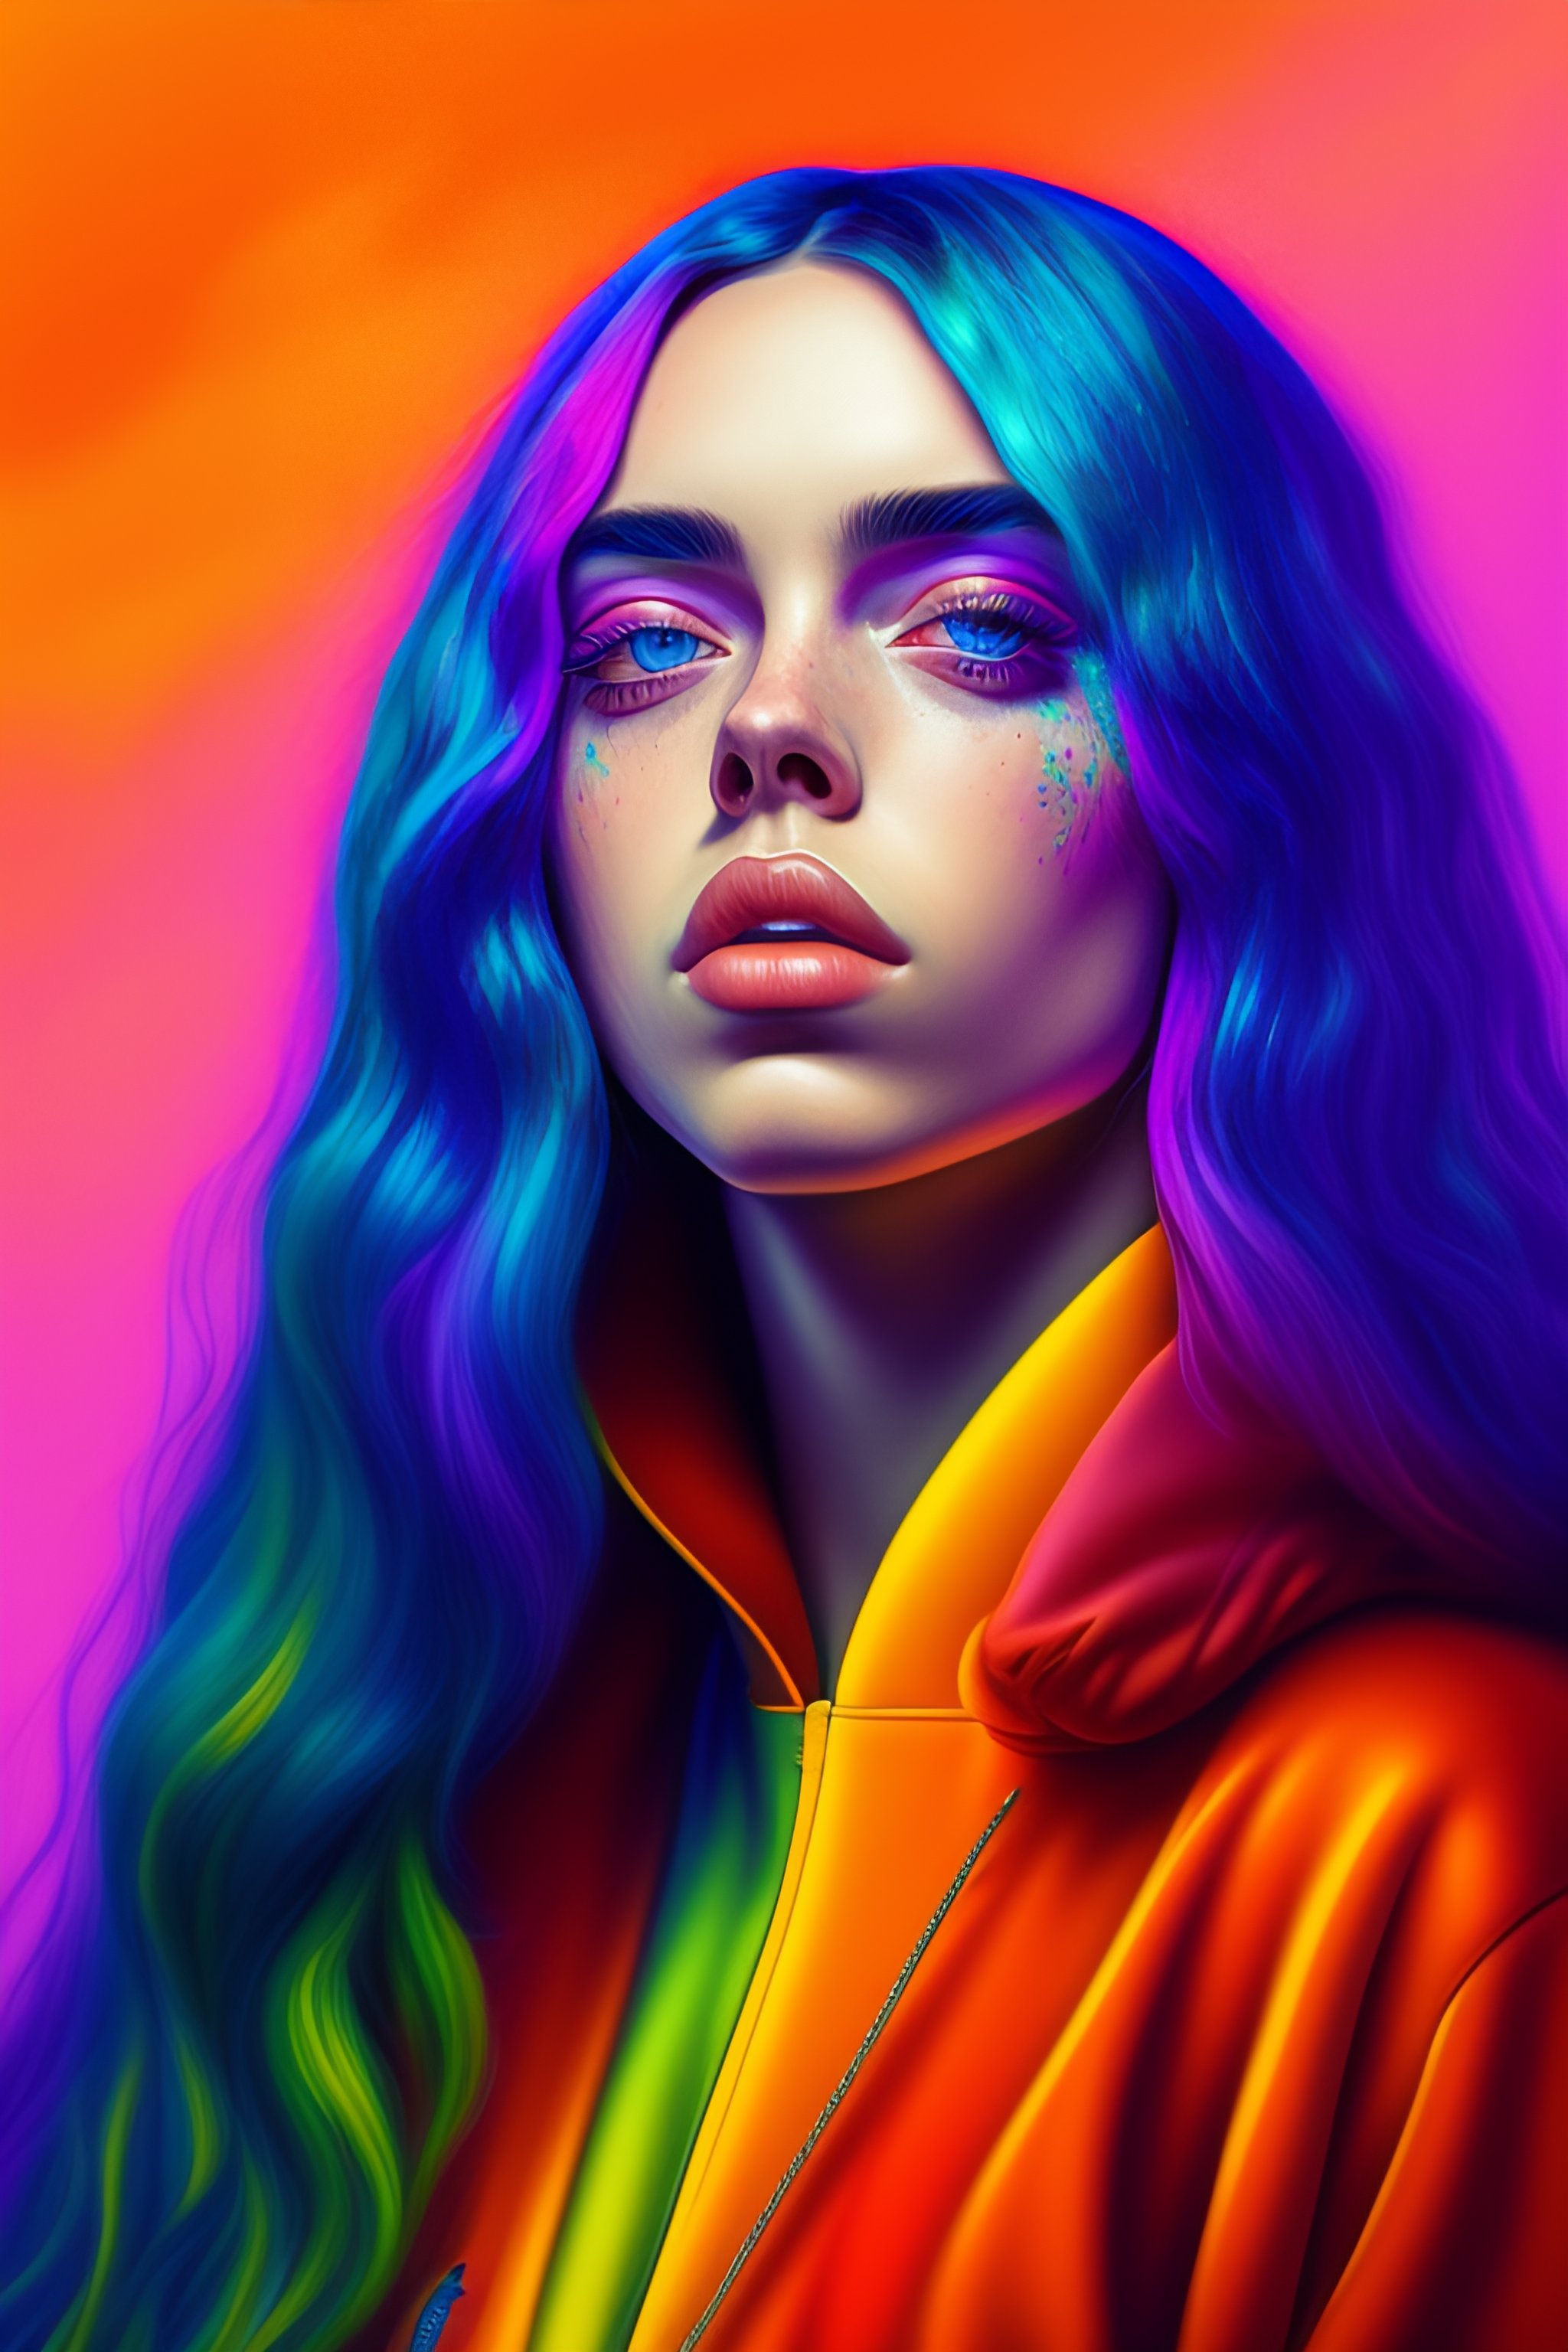 Lexica - An extremely psychedelic portrait of Billie Eilish surreal ...